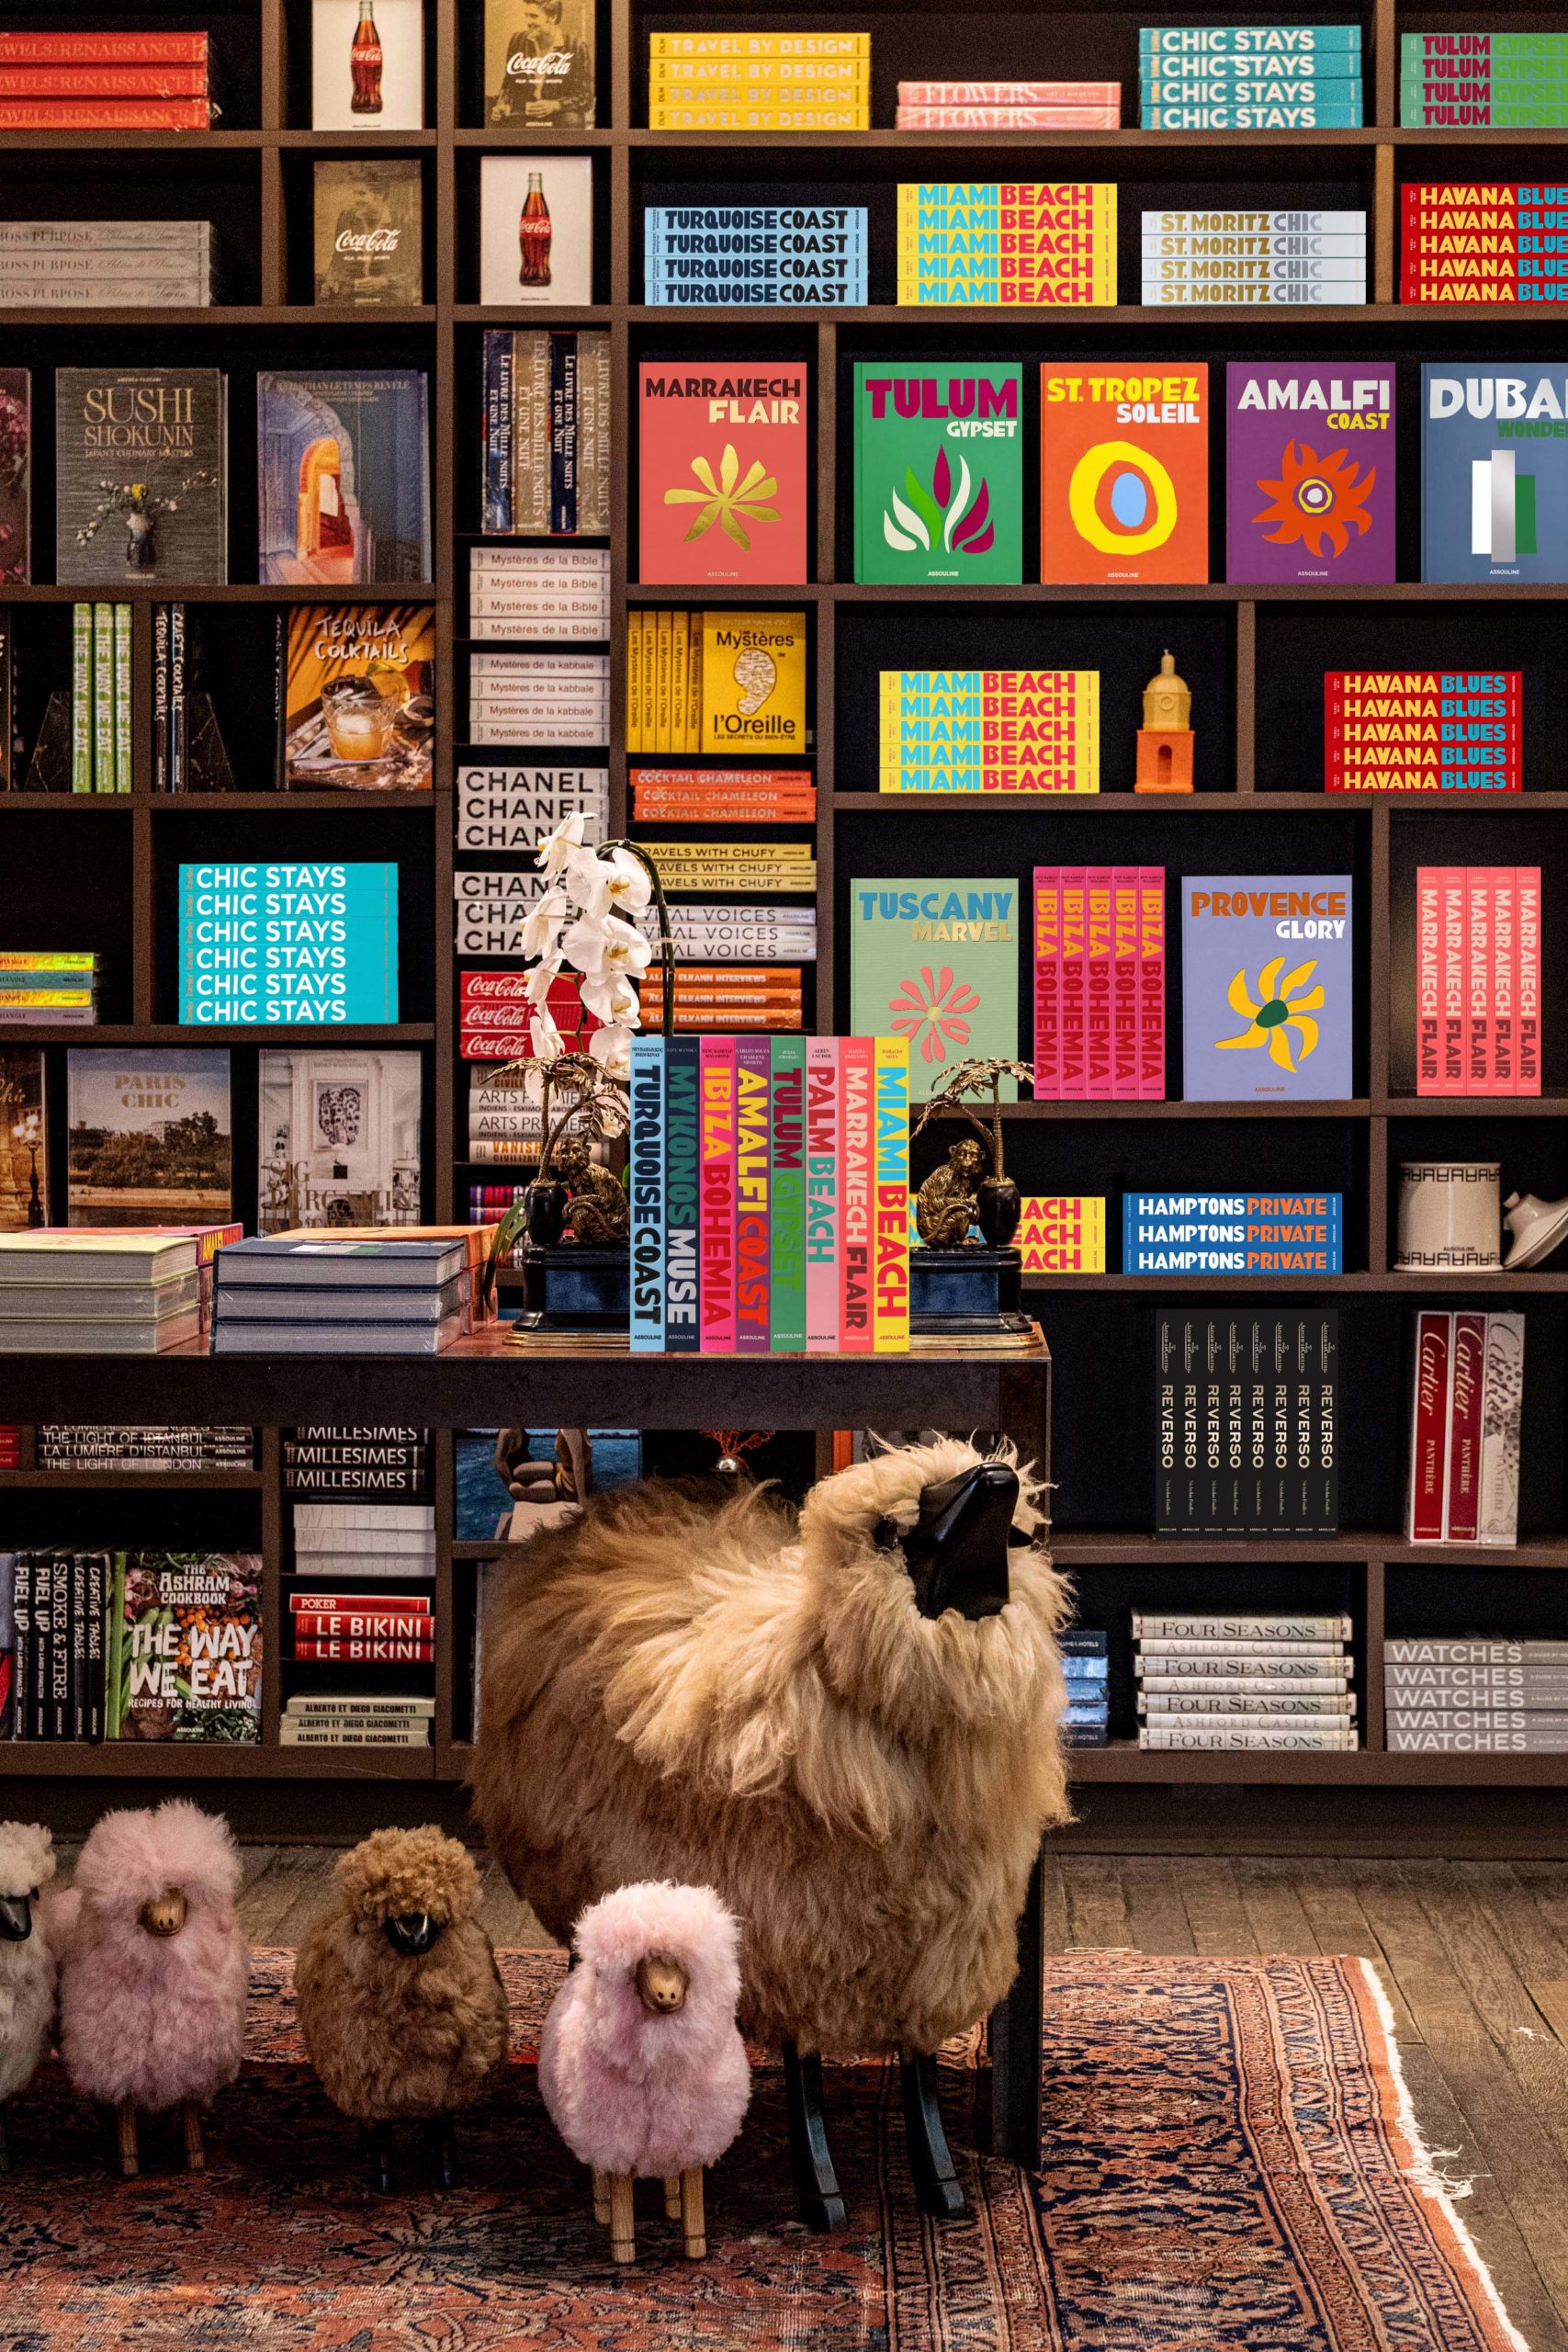 Assouline dropped their Louis Vuitton: Virgil Abloh book collection t